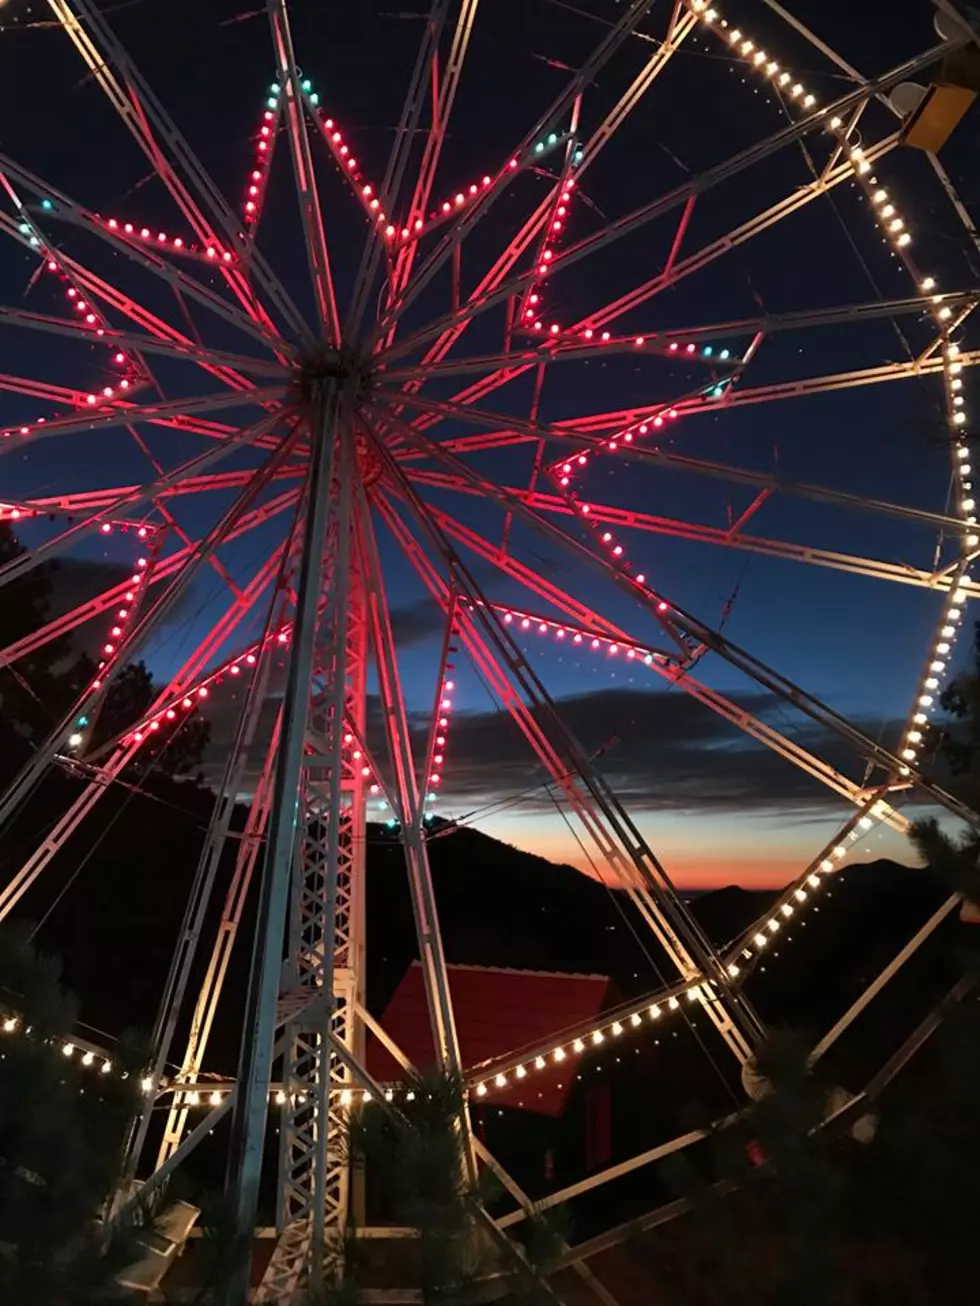 Coloradoans can Ring In Summer at a Christmas-Themed Amusement Park